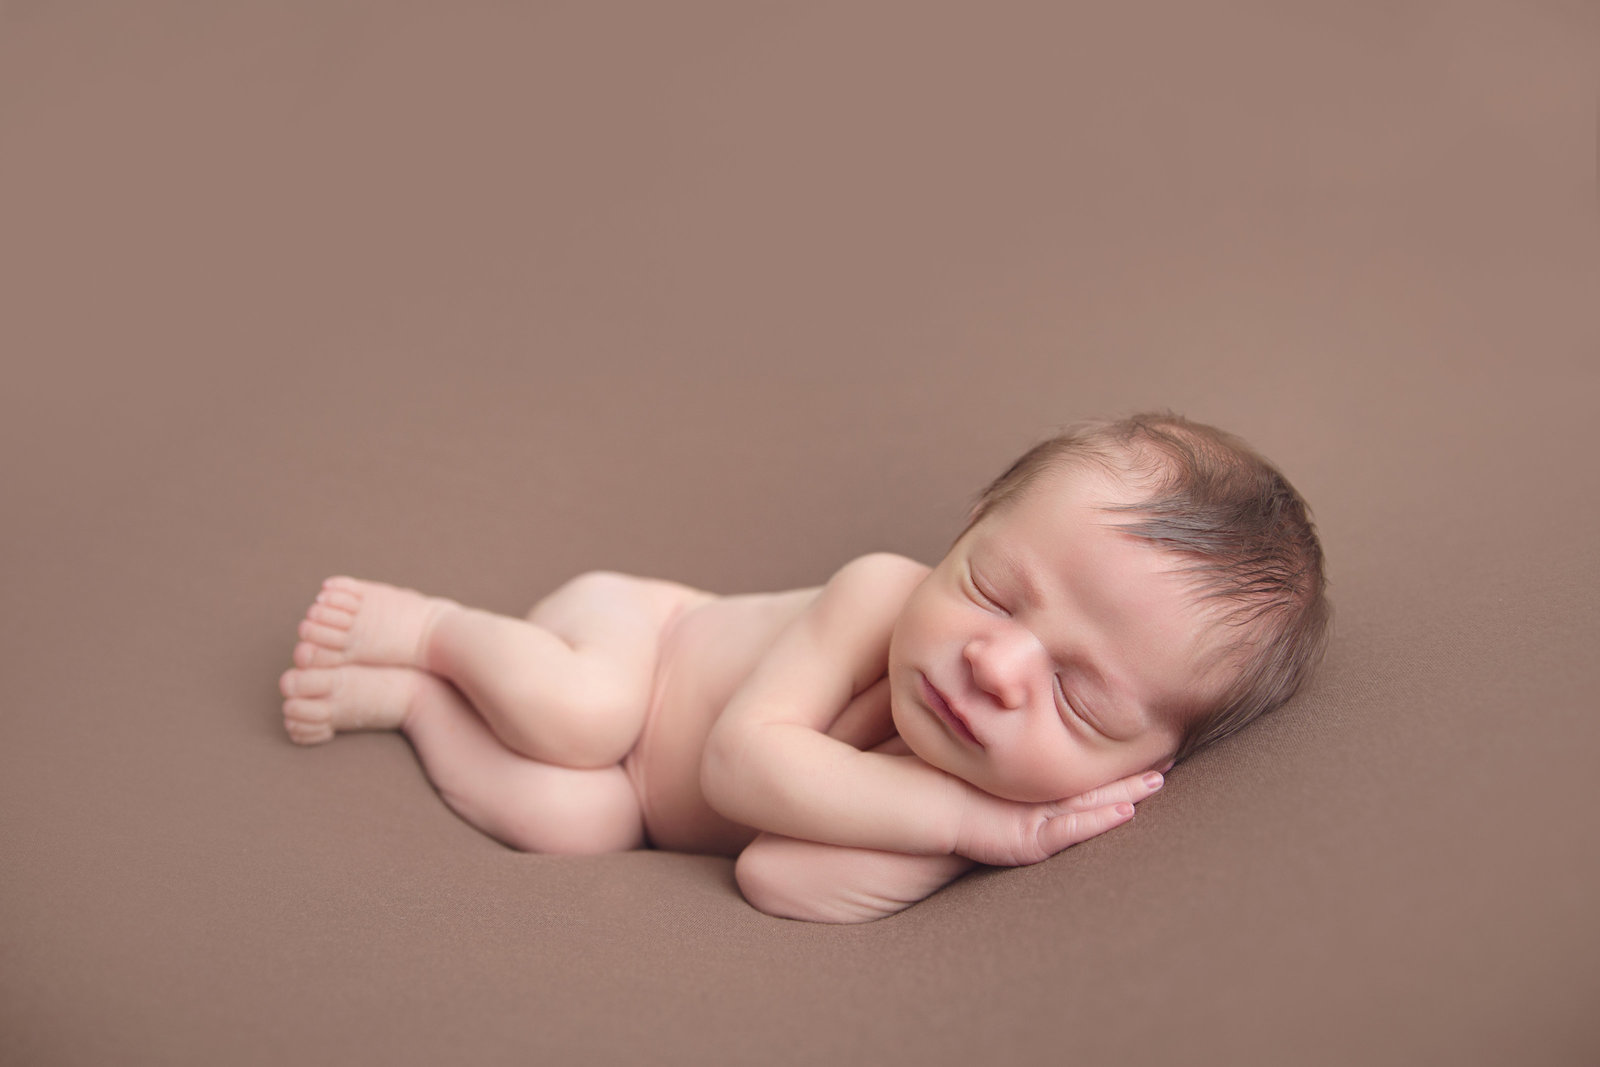 sleeping newborn baby posed on brown fabric in side laying pose